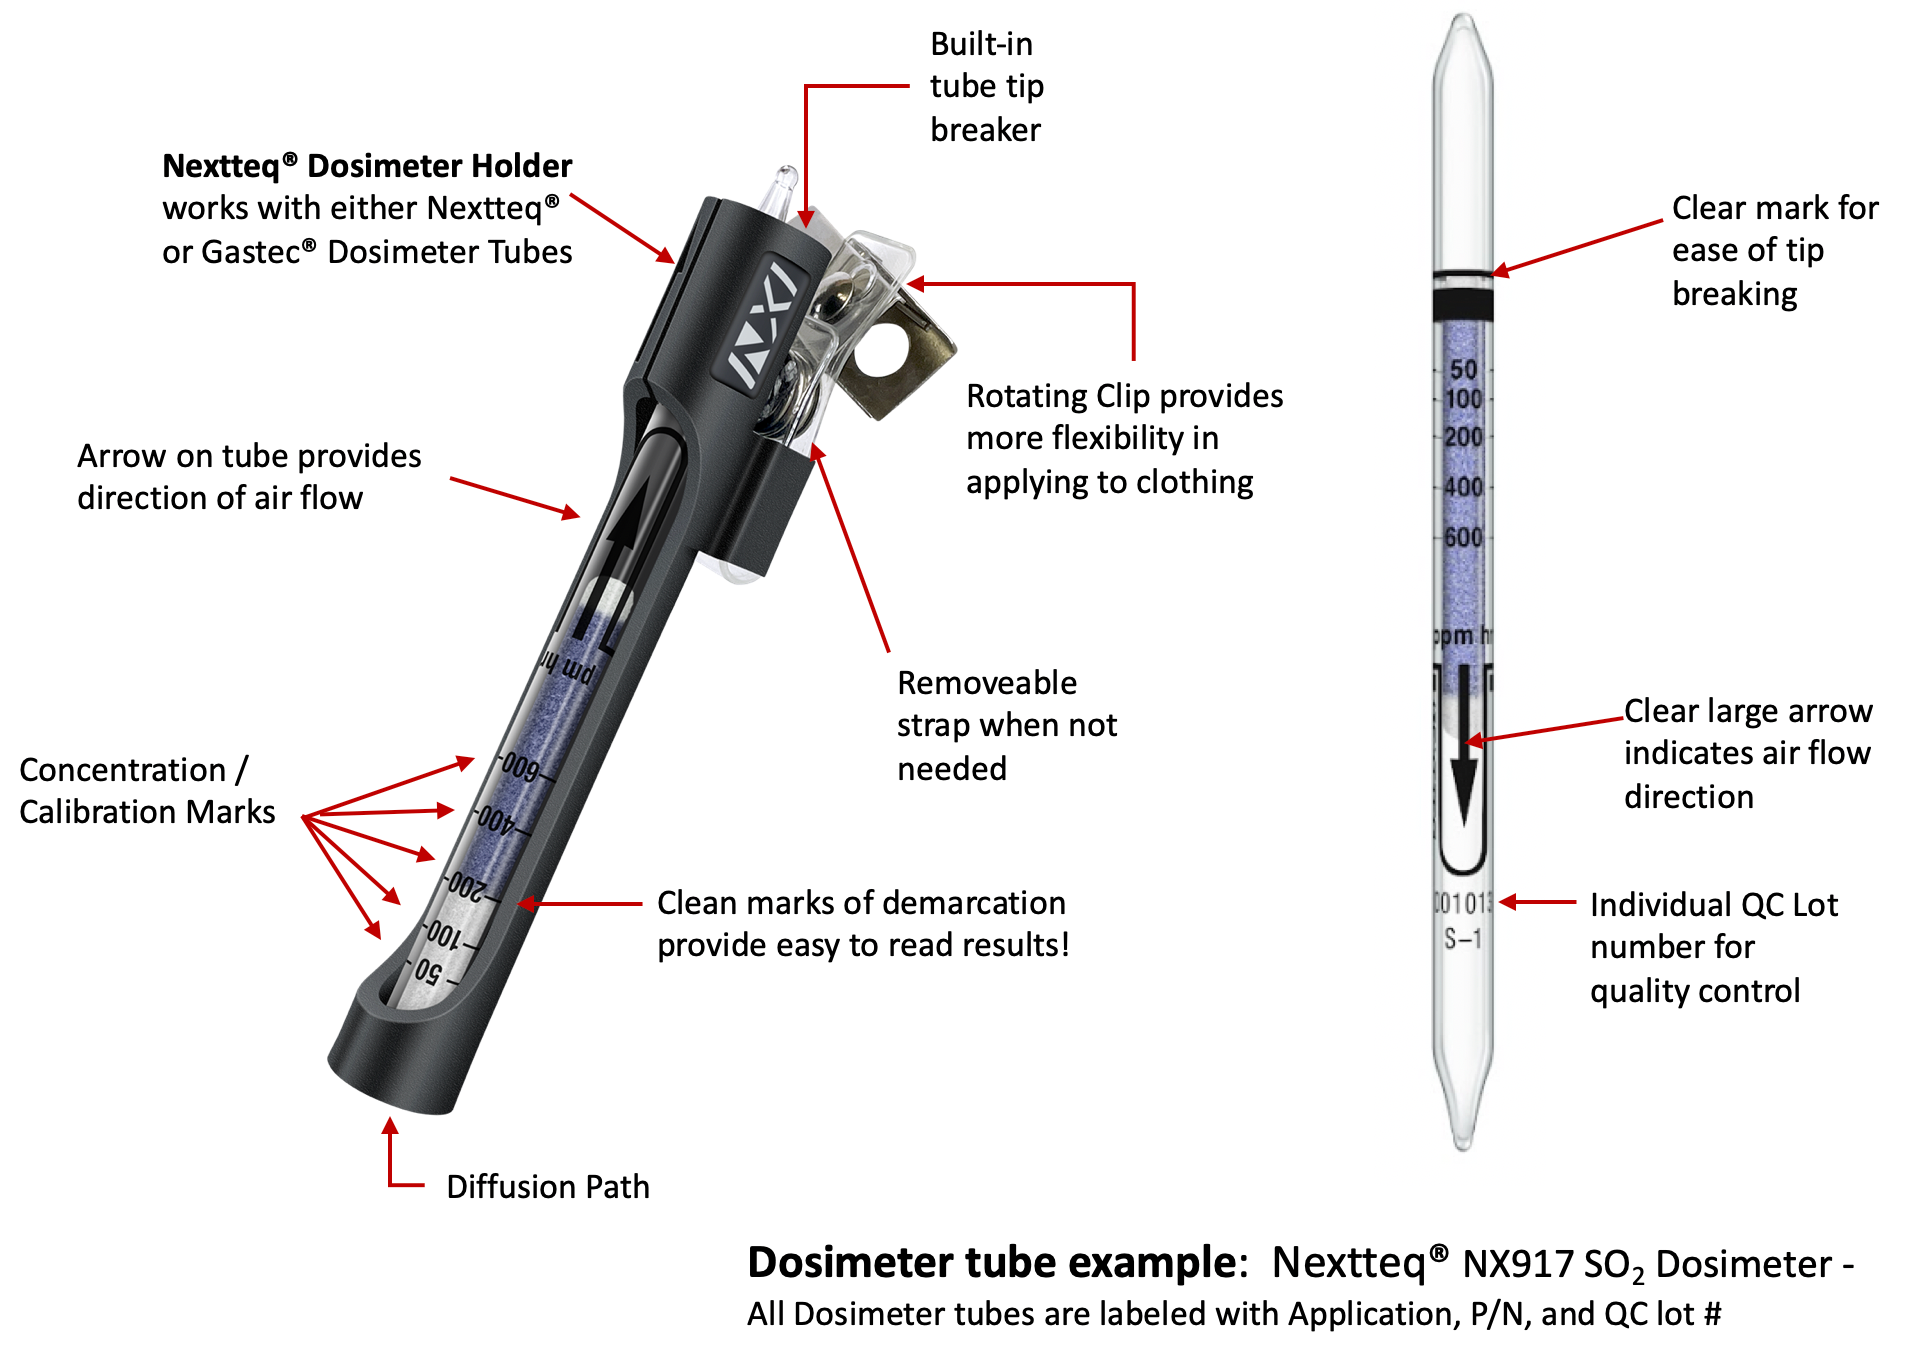 An image of a Nextteq® brand-labeled dosimeter tube and a Nextteq® brand-labeled dosimeter tube holder with feature call-outs.